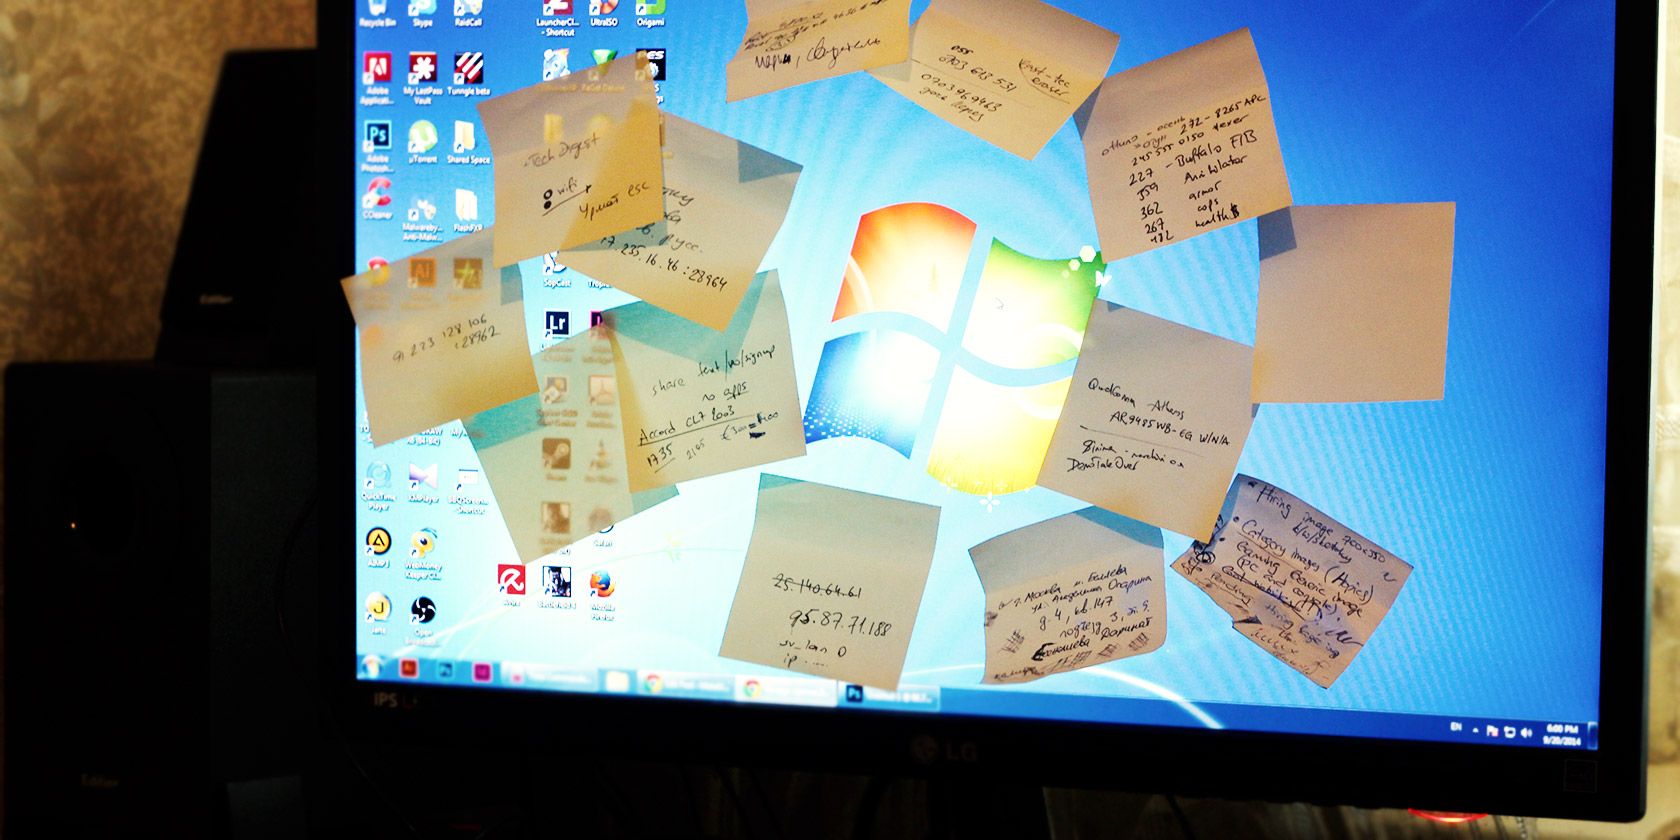 post it notes for your desktop free